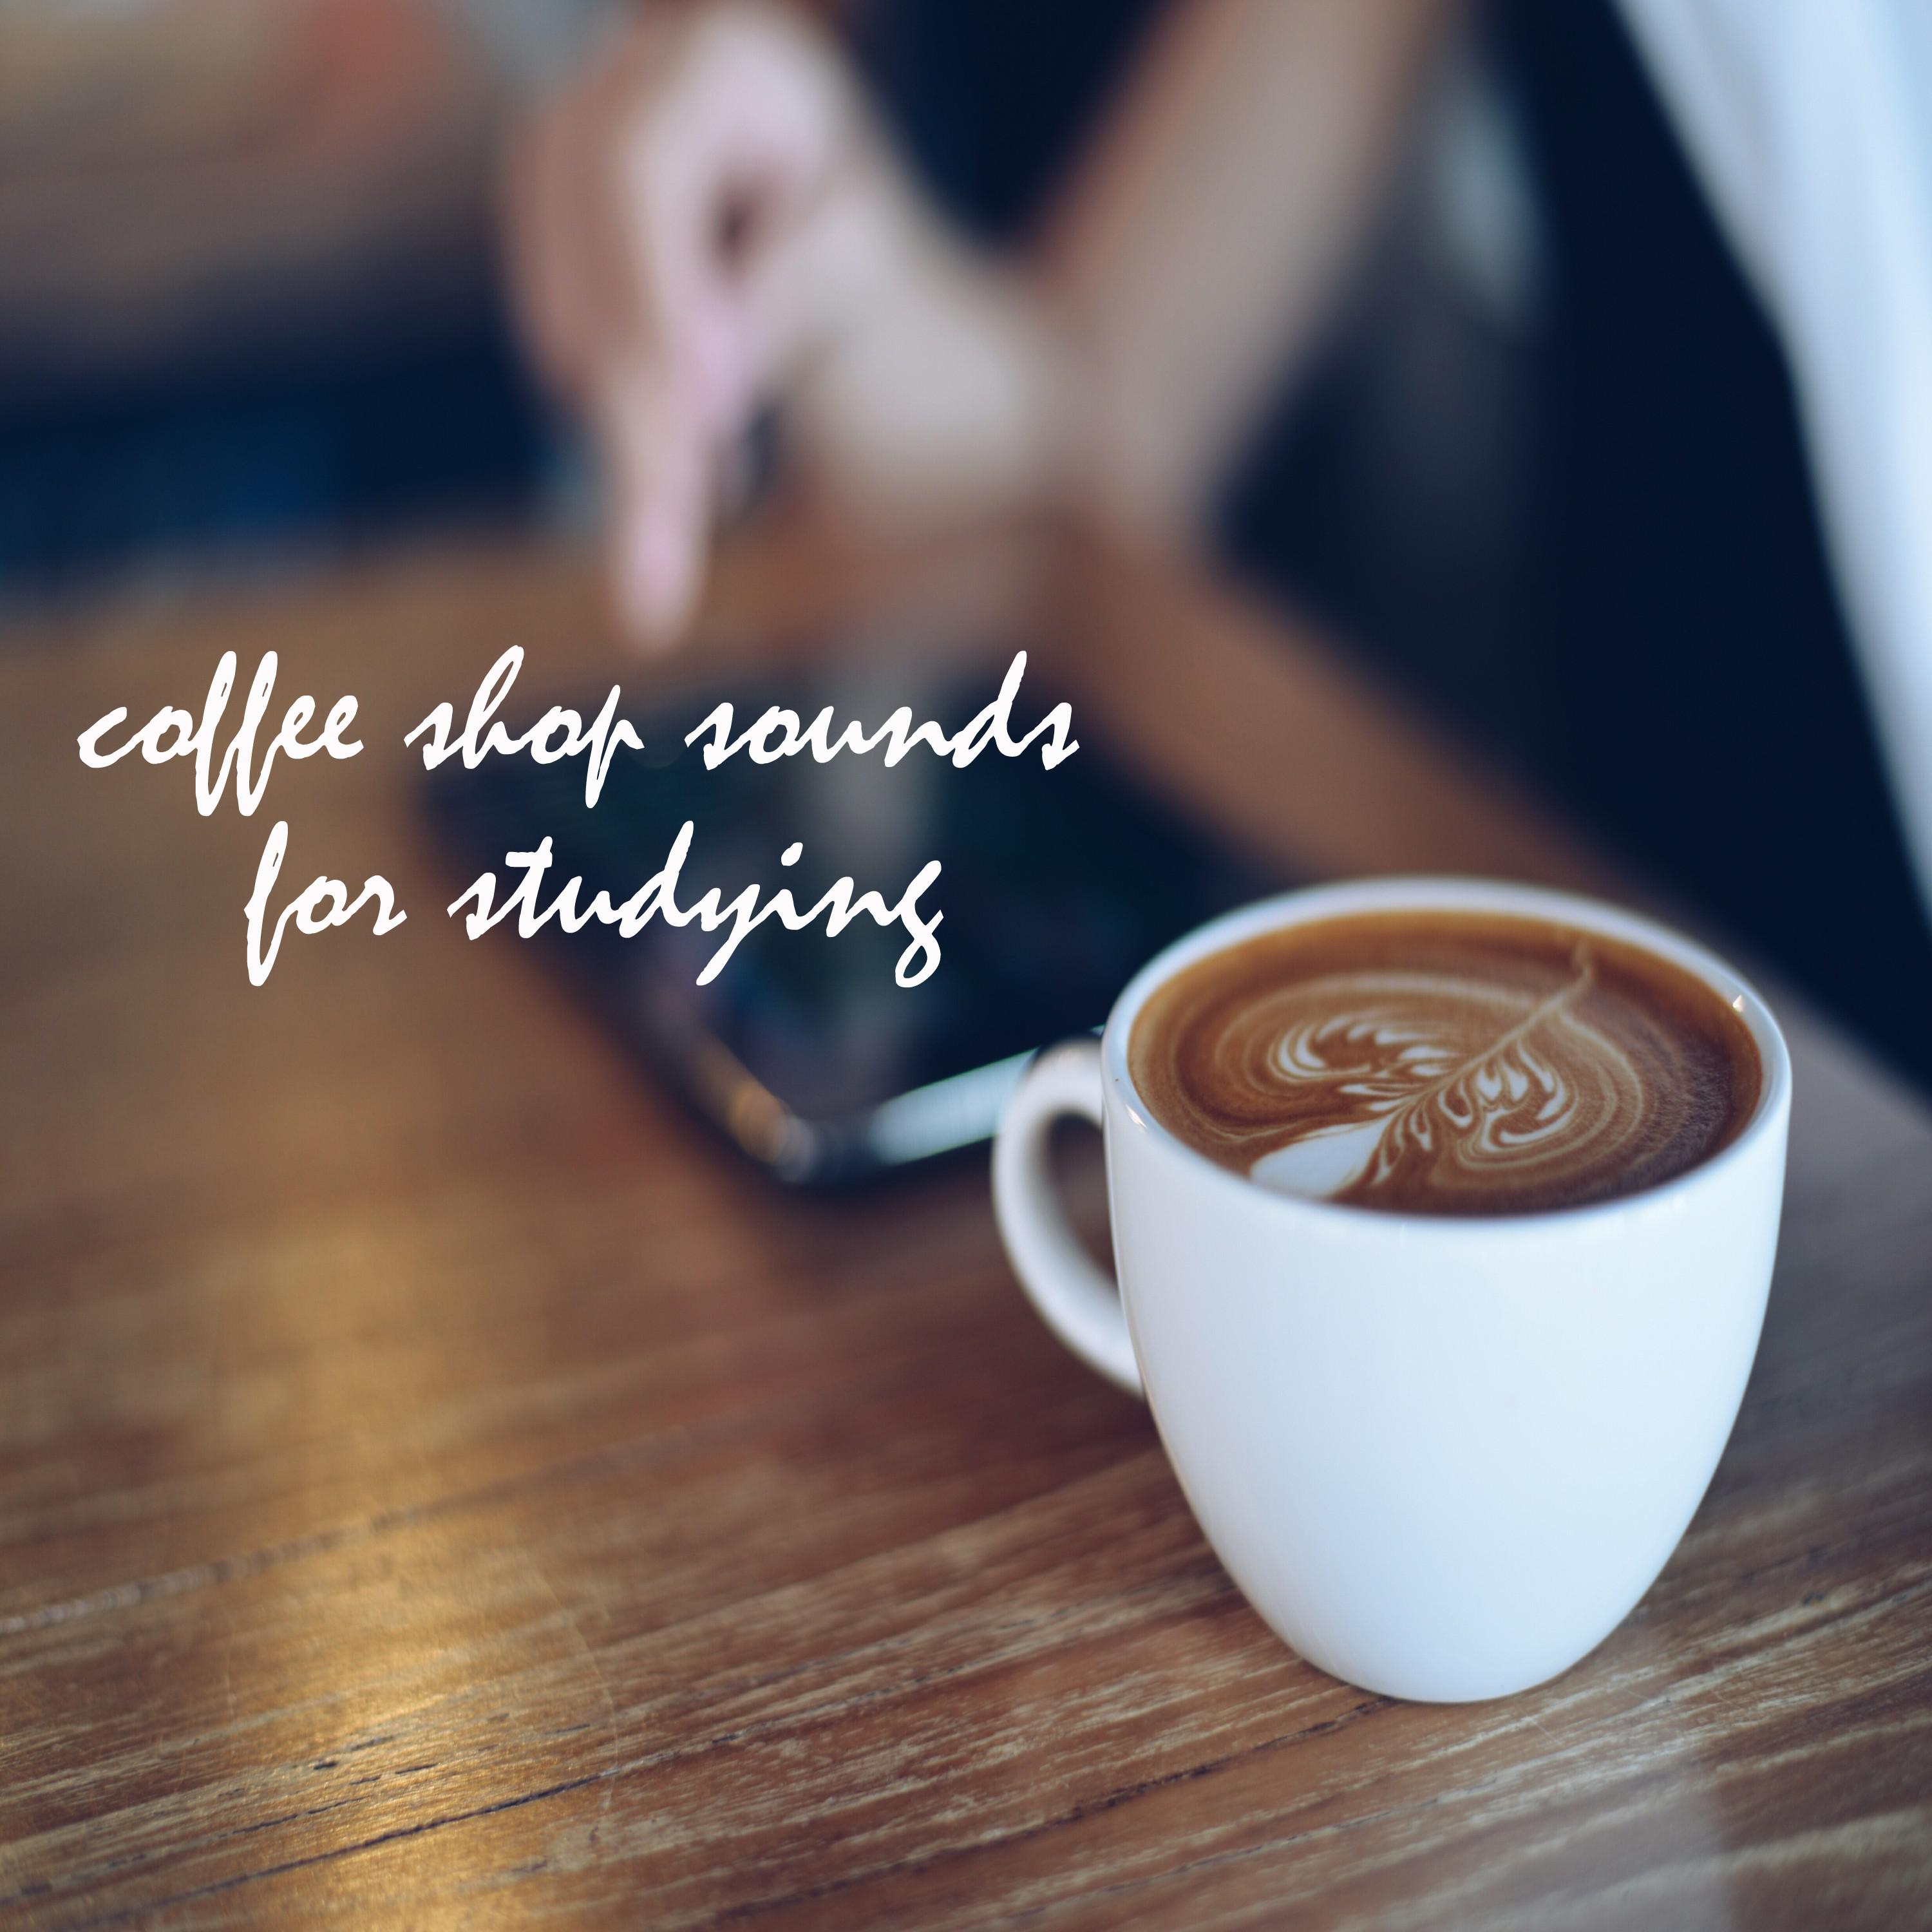 Coffee Shop Sounds for Studying and Working, Pt. 11